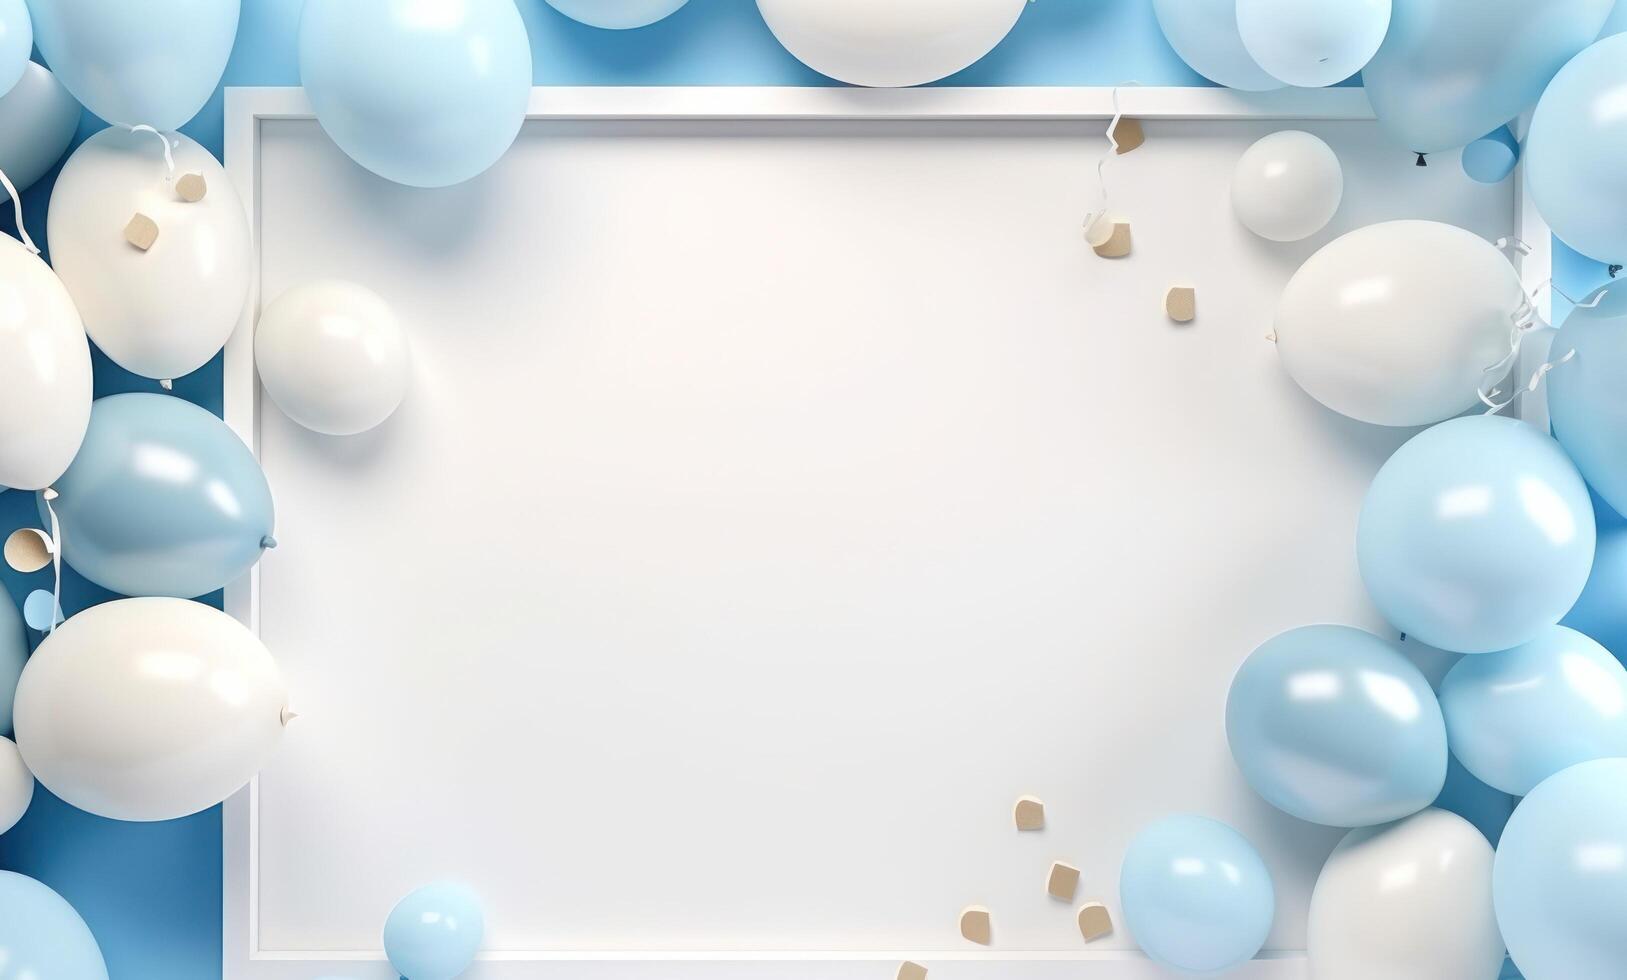 AI generated a blue and white frame with balloons on it photo